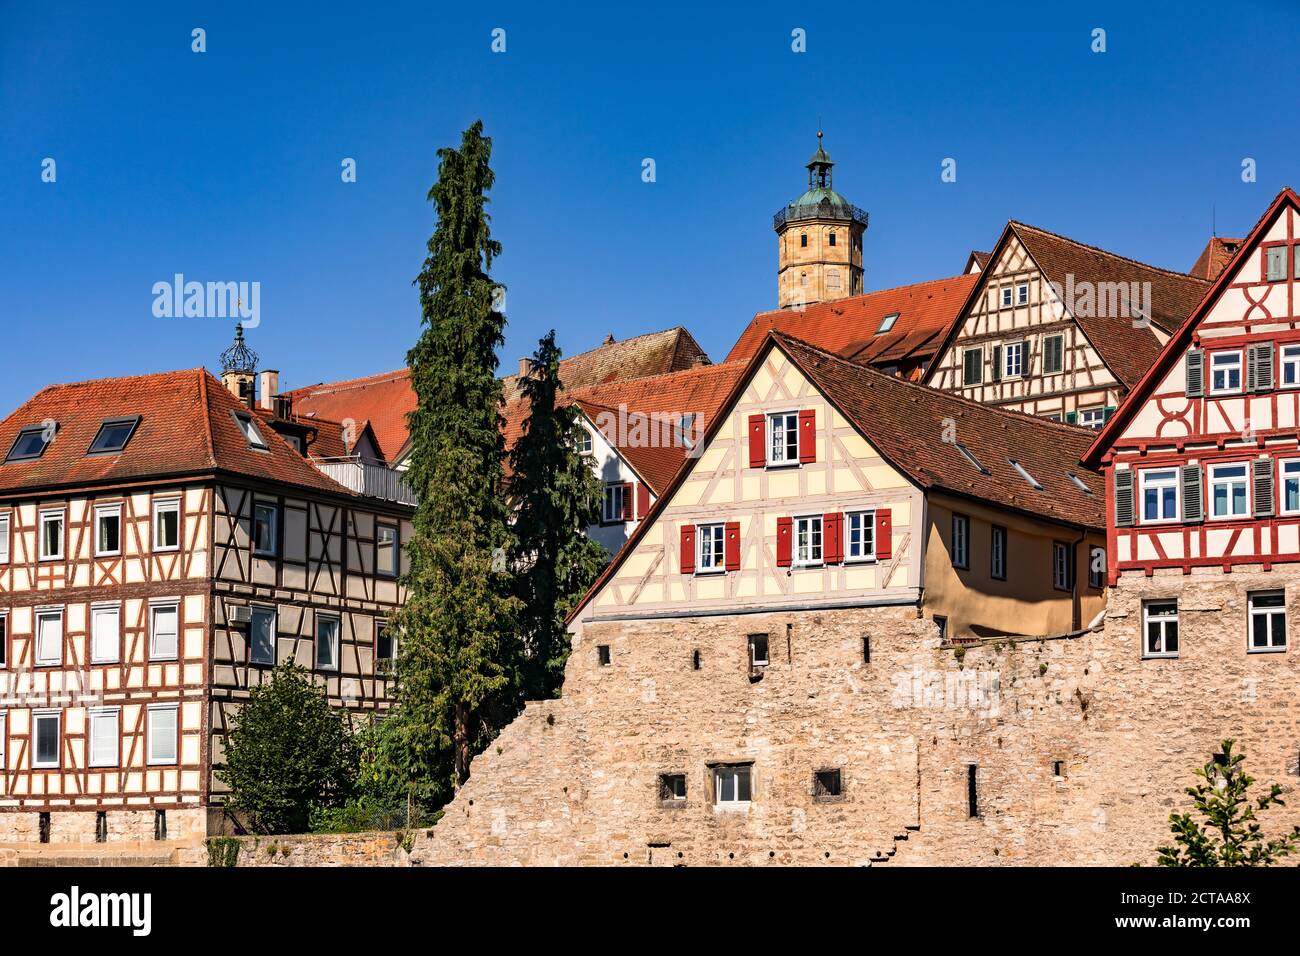 The historic old town of Schwaebisch Hall is well preserved and consists of a large number of half-timbered houses Stock Photo